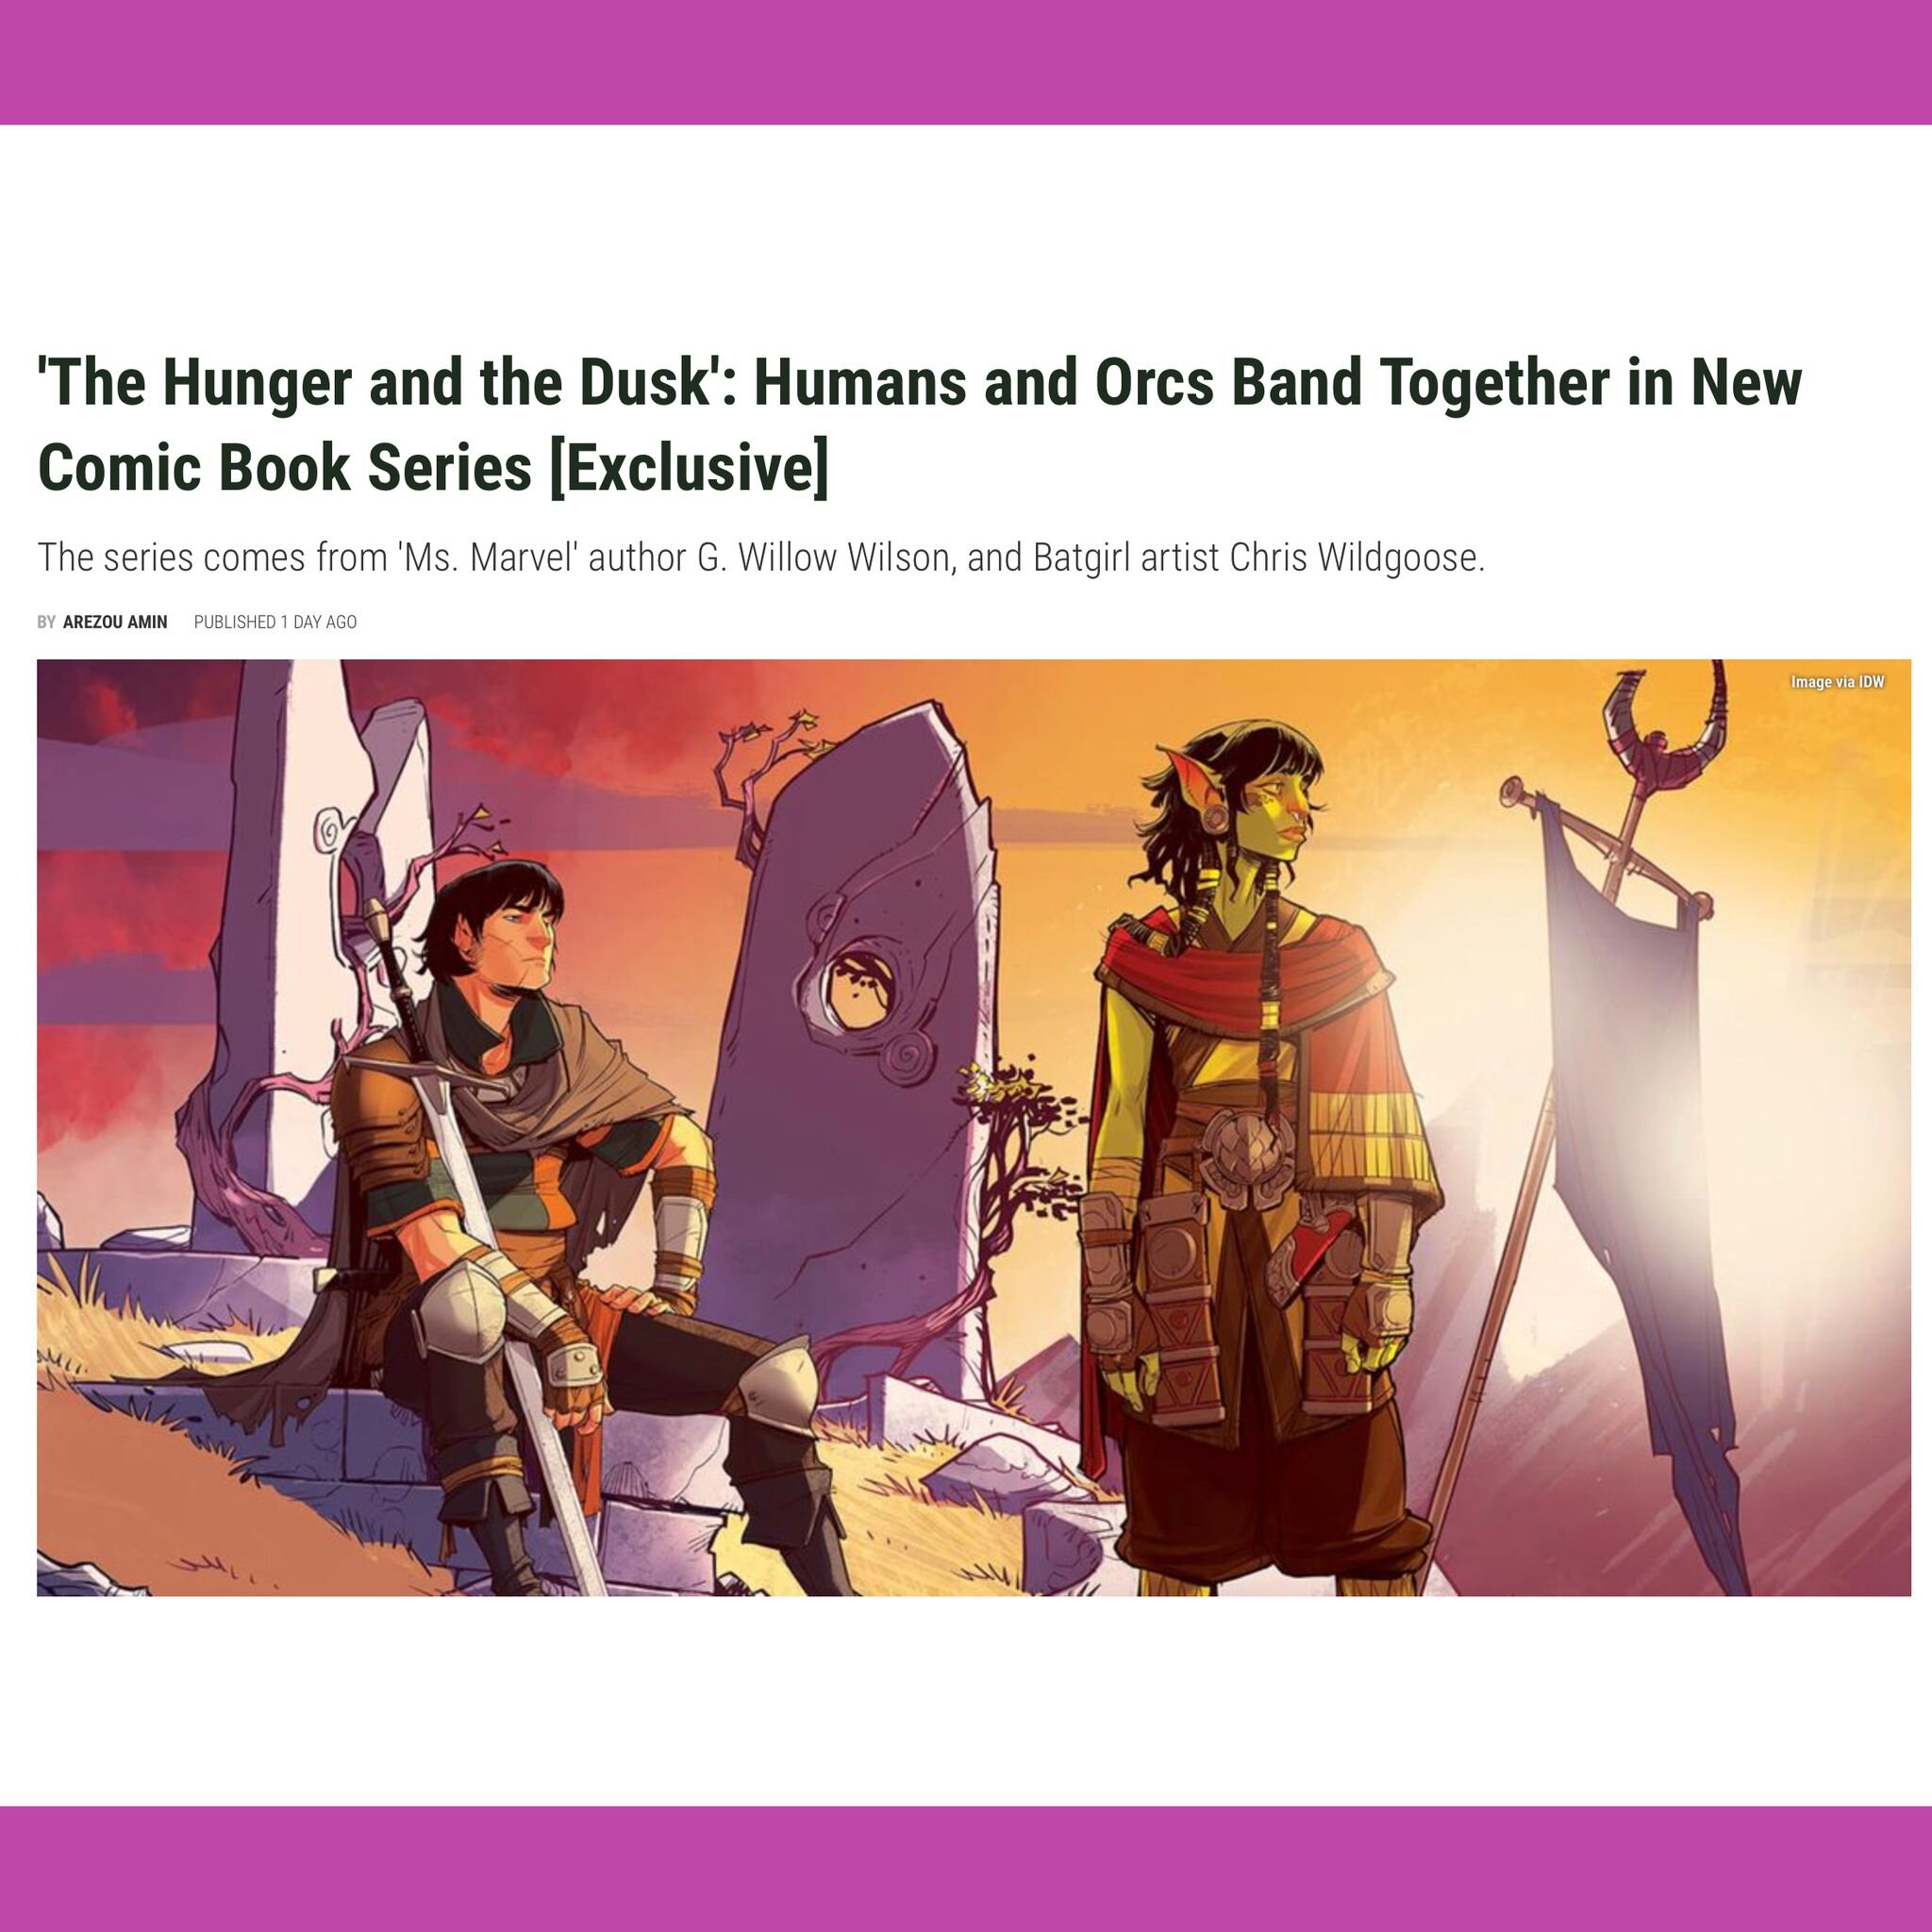 📢NEWS DROP
Prepare yourself to embark on a quest! 
I've been collaborating with an amazing team at @idwpublishing with @thisisgww @mrriktus @mhowel at the creative front to bring you an orc-filled, hi-fantasy EPIC. 

The Hunger and The Dusk is ready